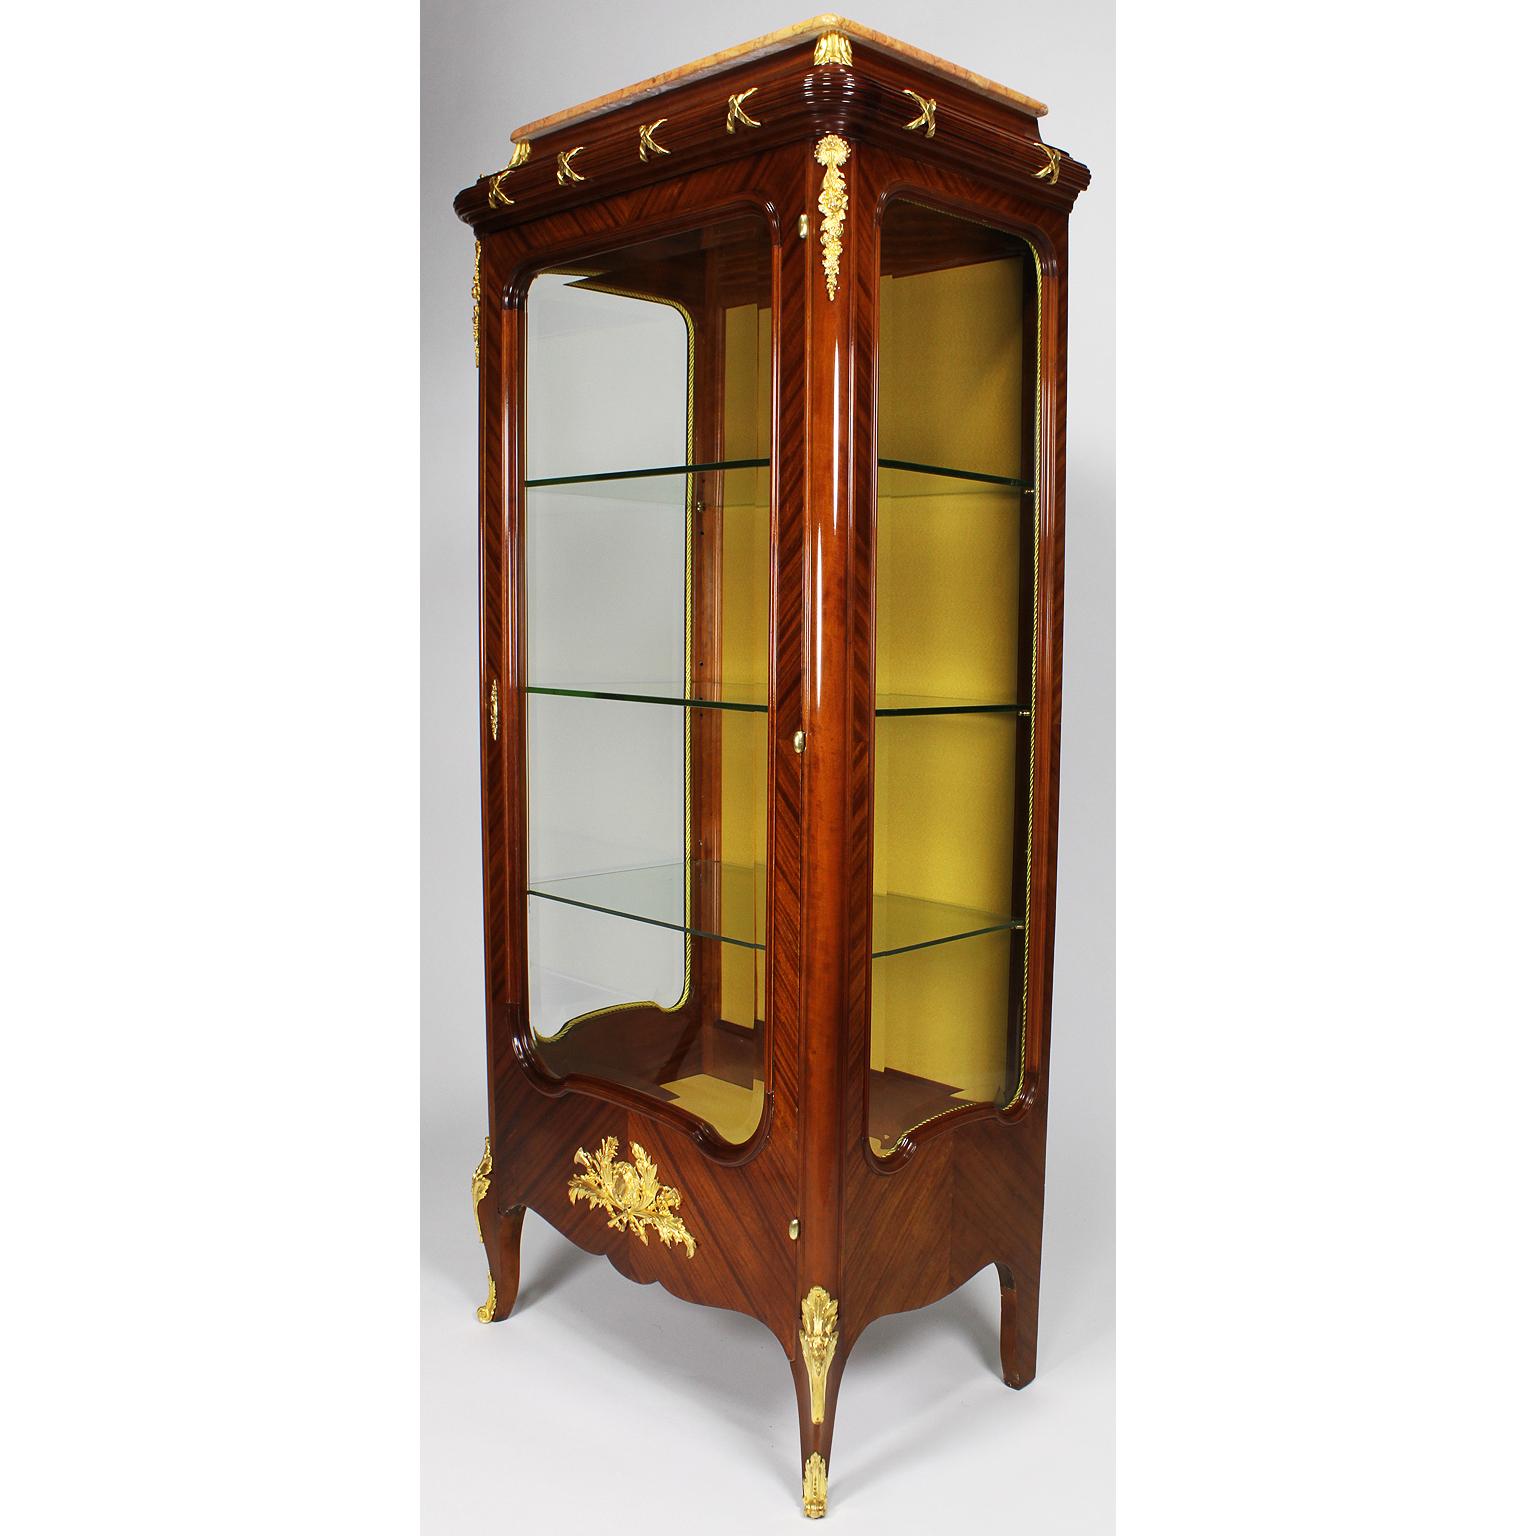 A Fine French 19th-20th century Louis XV style ormolu-mounted tulipwood vitrine with marble top, in the manner of François Linke (1855-1946). The slender single door cabinet fitted with a veined peach-color marble top, three interior glass shelves